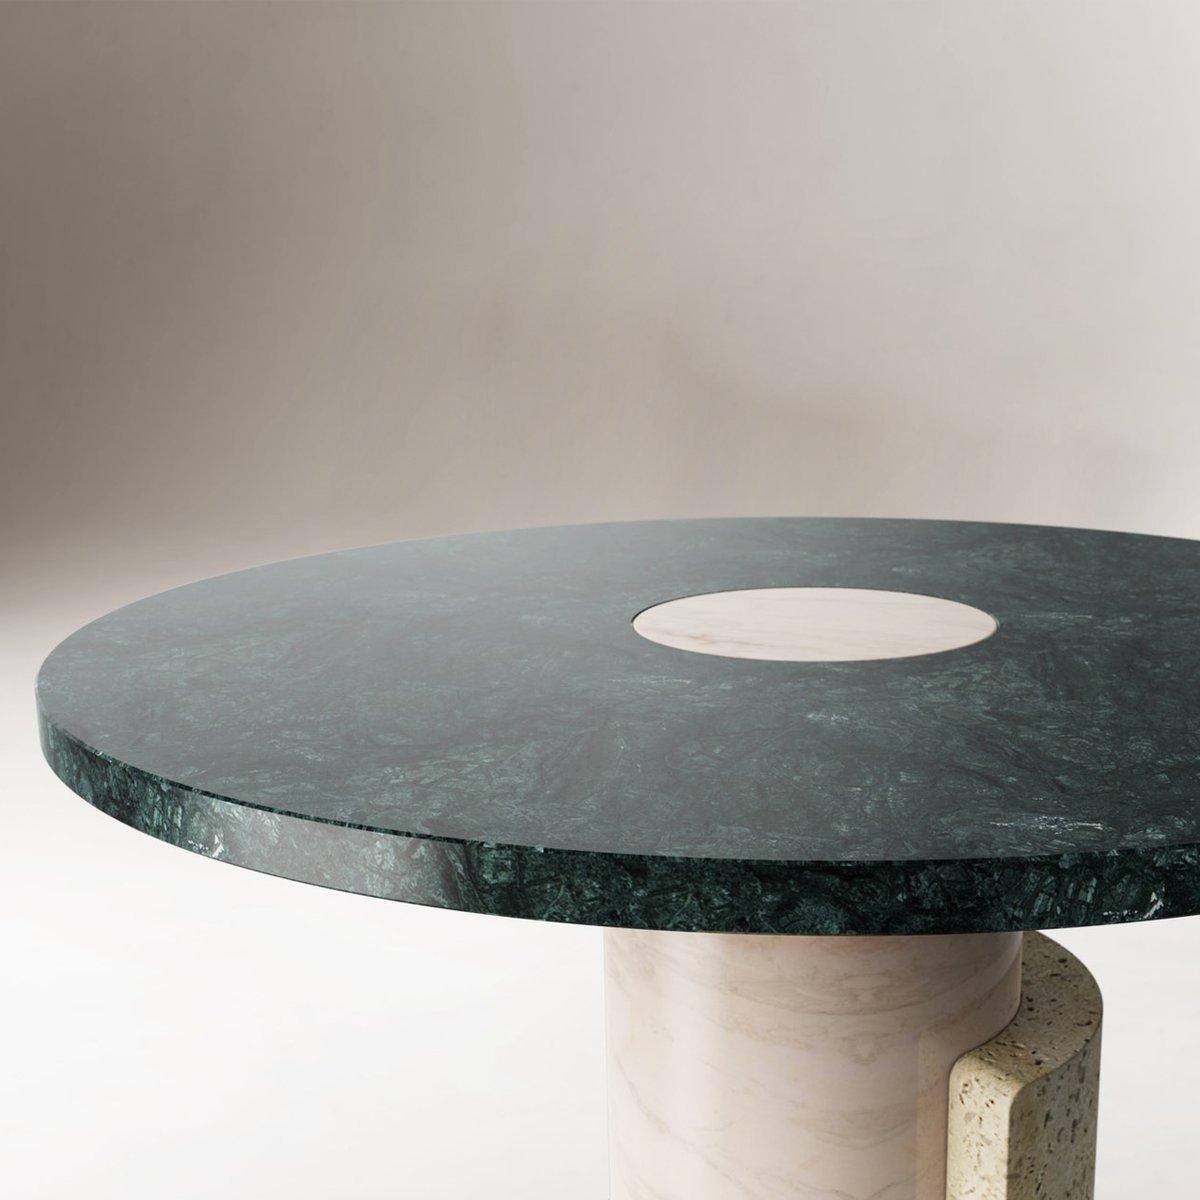 Braque Contemporary Marble Side Table by Dooq

Dimensions
W 60 x D 60 x H 55 cm

Materials and finishes
Entirely handmade in marble

Product
The Braque side table is an elegant and slick side table created by Dooq. Braque is entirely hand made in